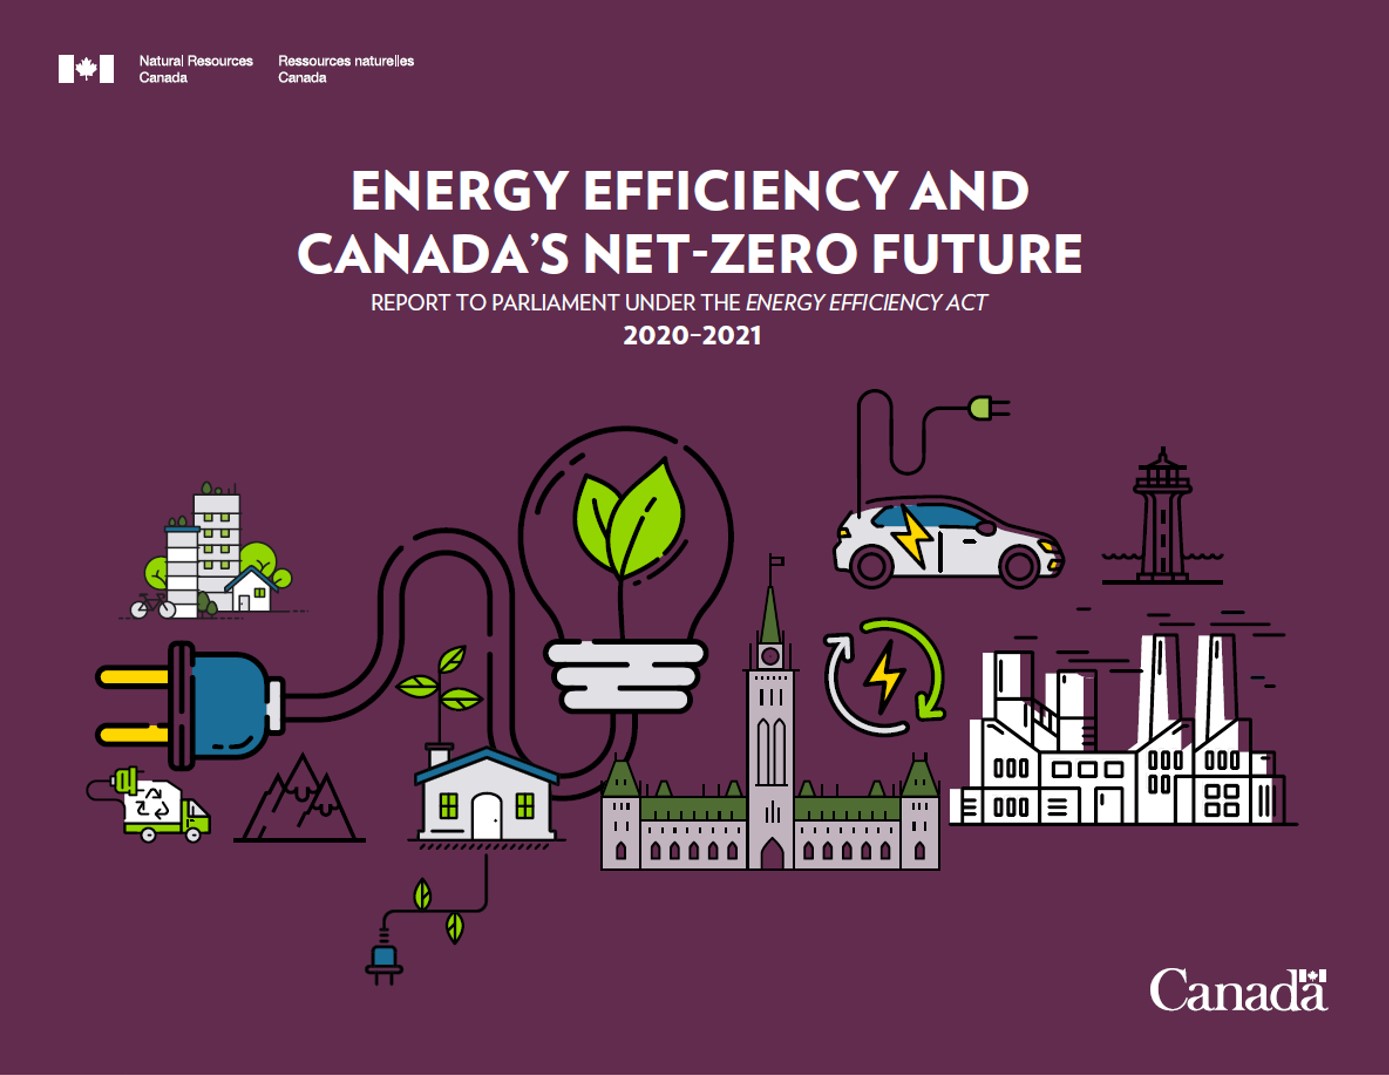 ENERGY EFFICIENCY AND CANADA’S NET-ZERO FUTURE: REPORT TO PARLIAMENT UNDER THE ENERGY EFFICIENCY ACT, 2020-2021